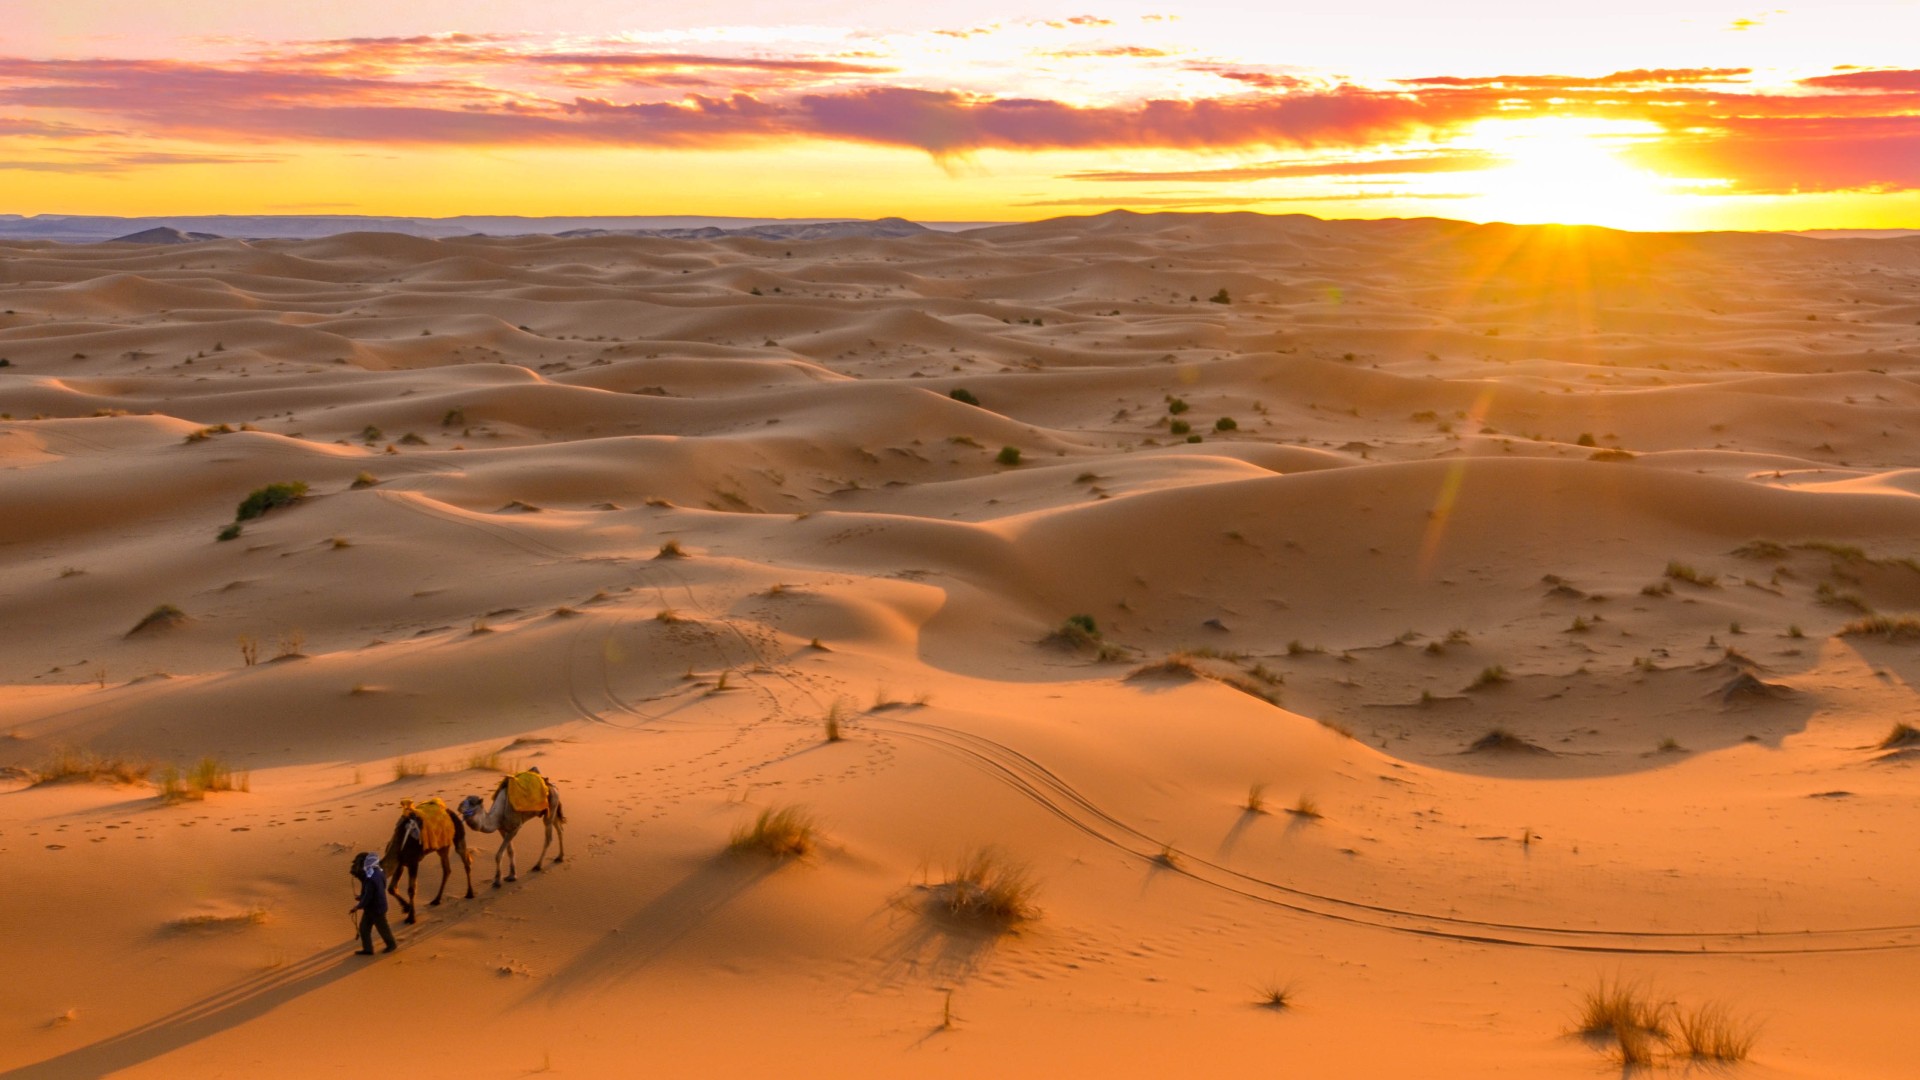 Here we see a beautiful sunset over the desert.  In the foreground, a figure leads two camels.